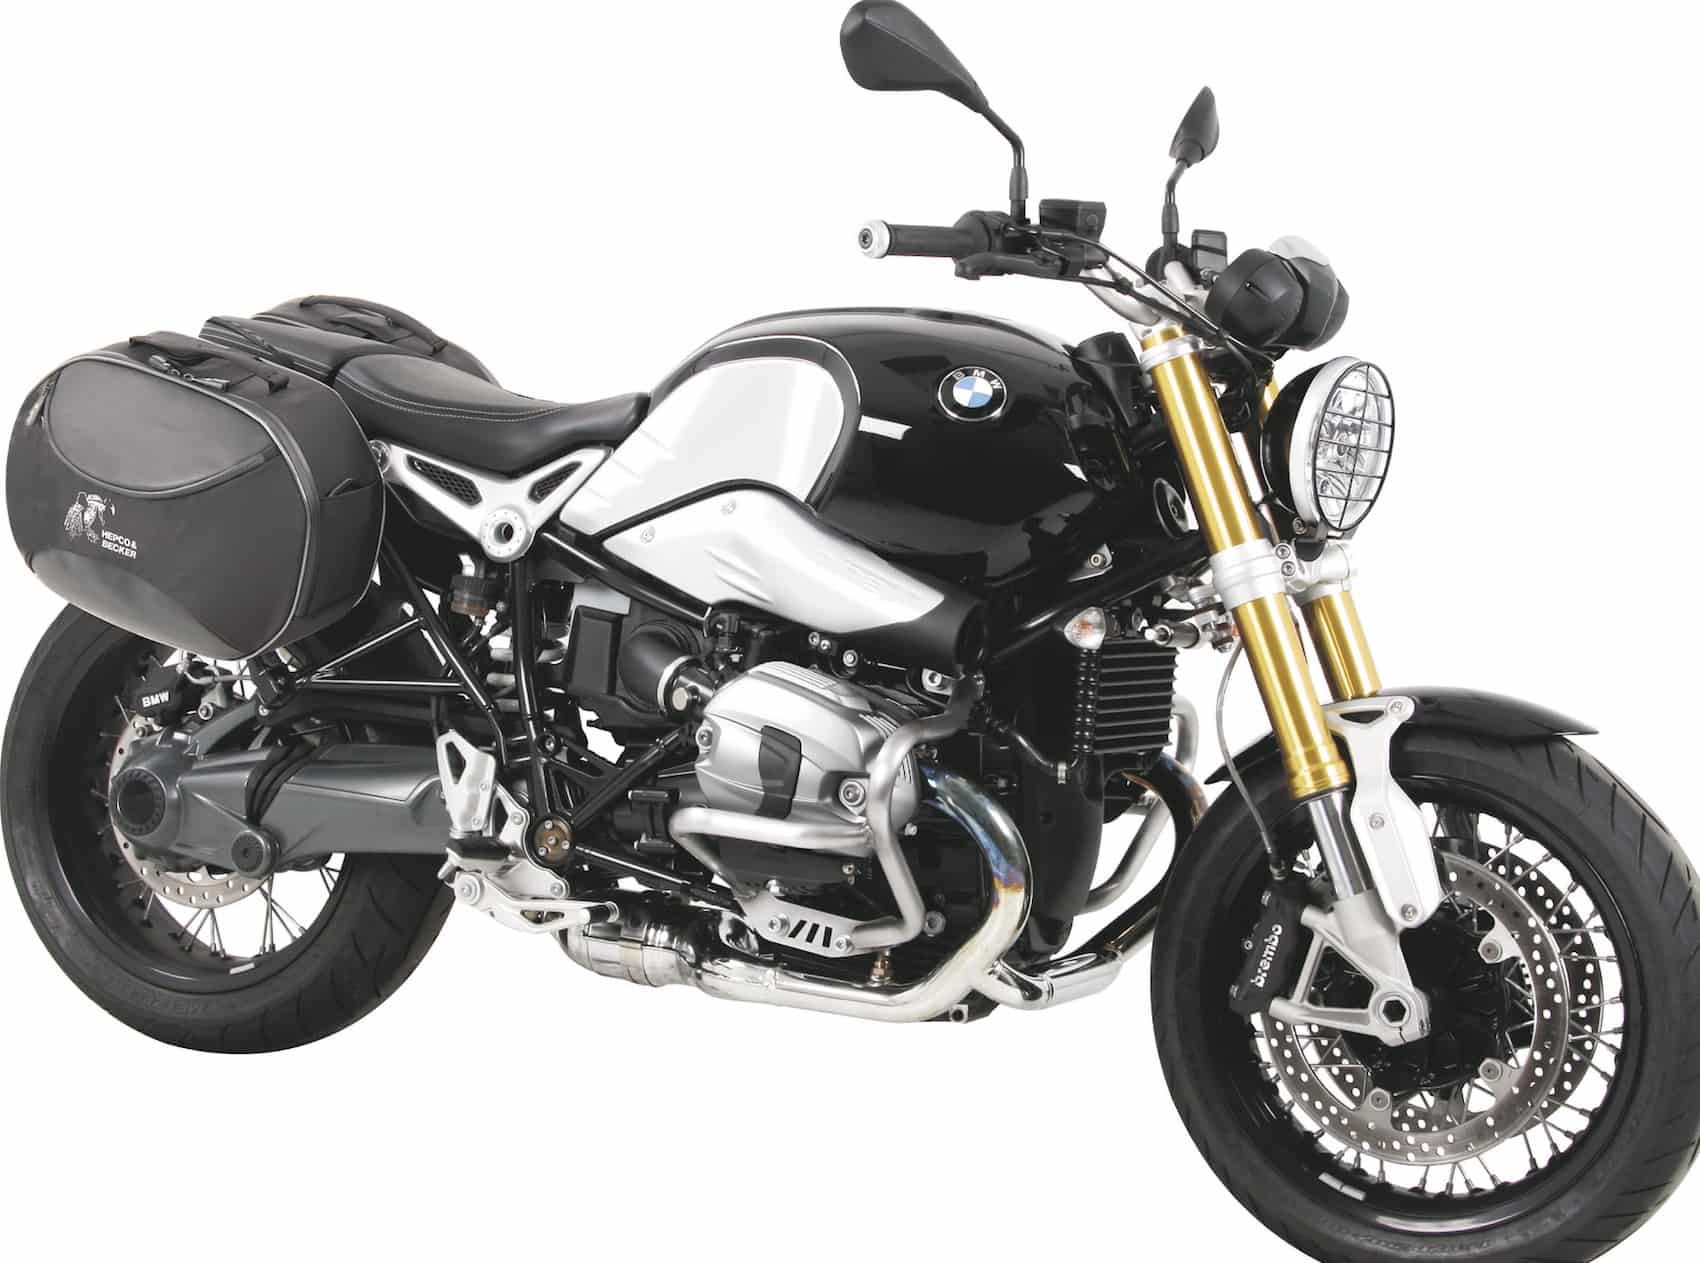 C-Bow sidecarrier for BMW R nineT (2014-2016)